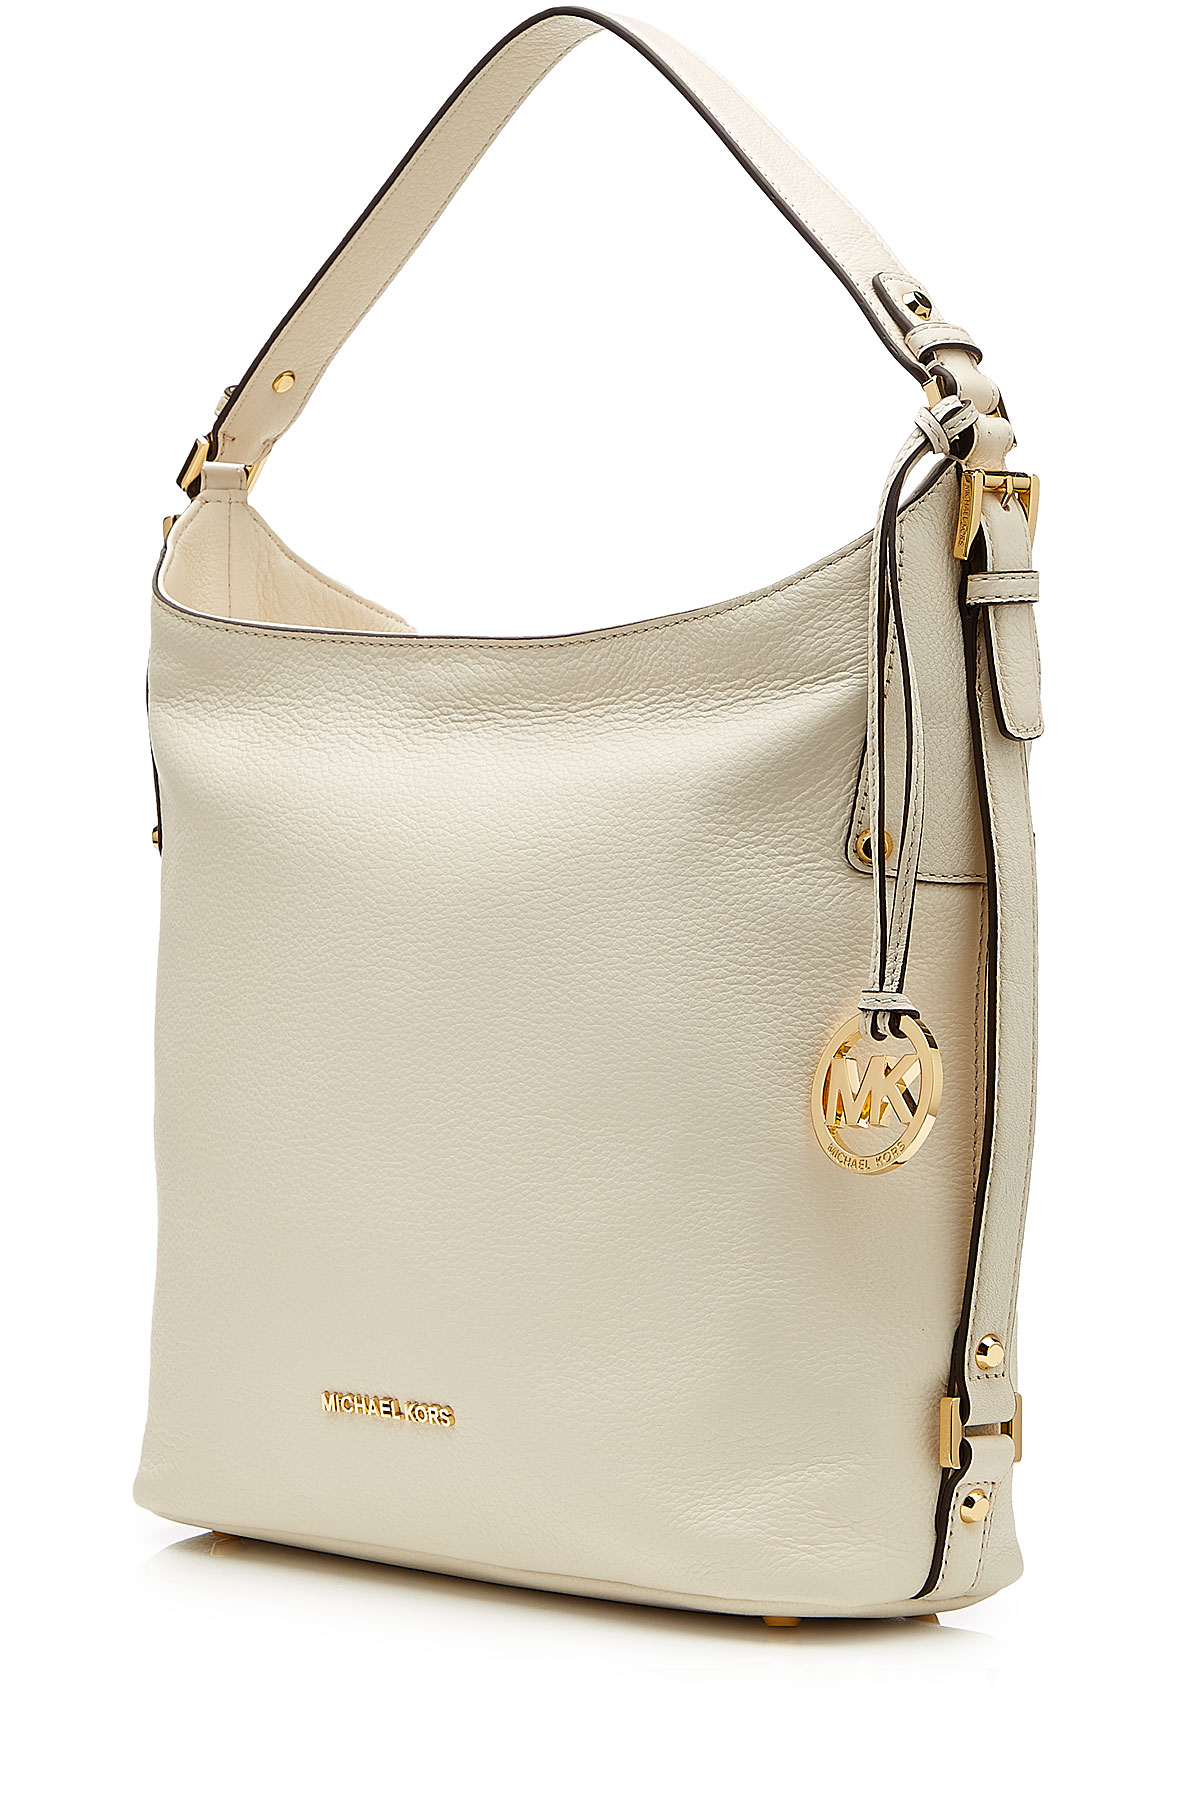 MICHAEL Michael Kors Bedford Large Leather Shoulder Bag - White in White - Lyst